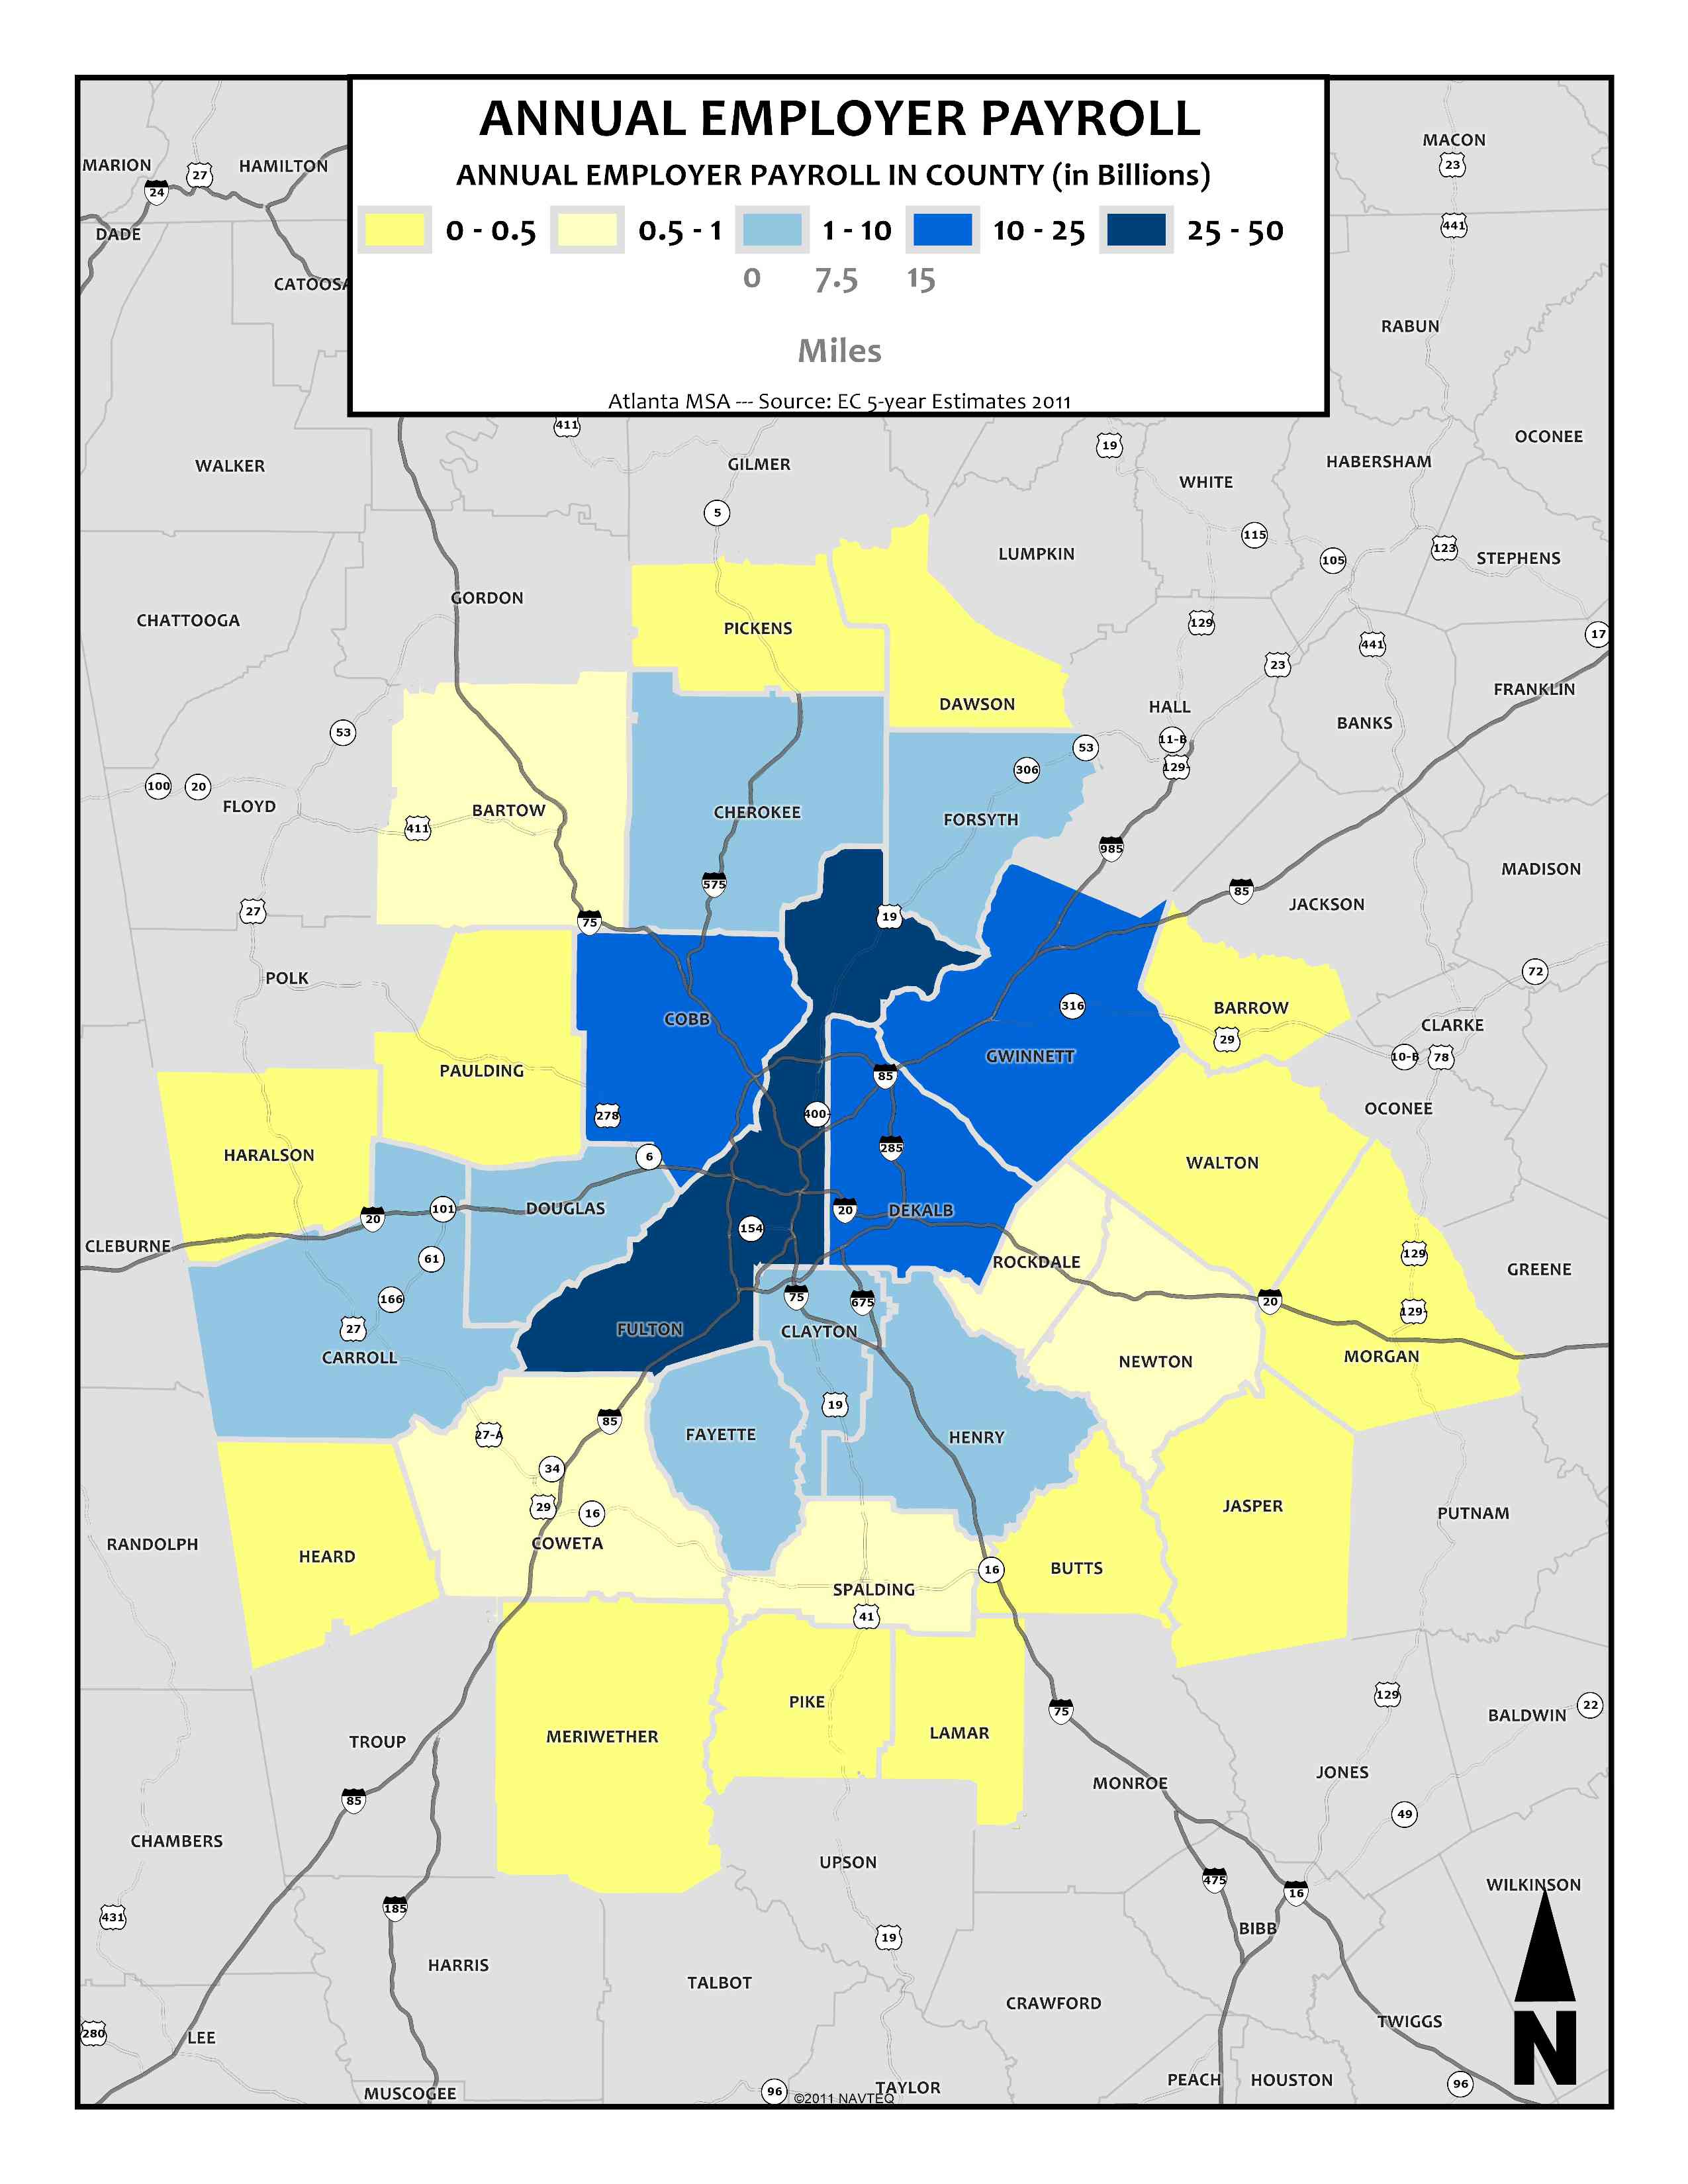 Annual Employer Payroll, 2011 – metro counties